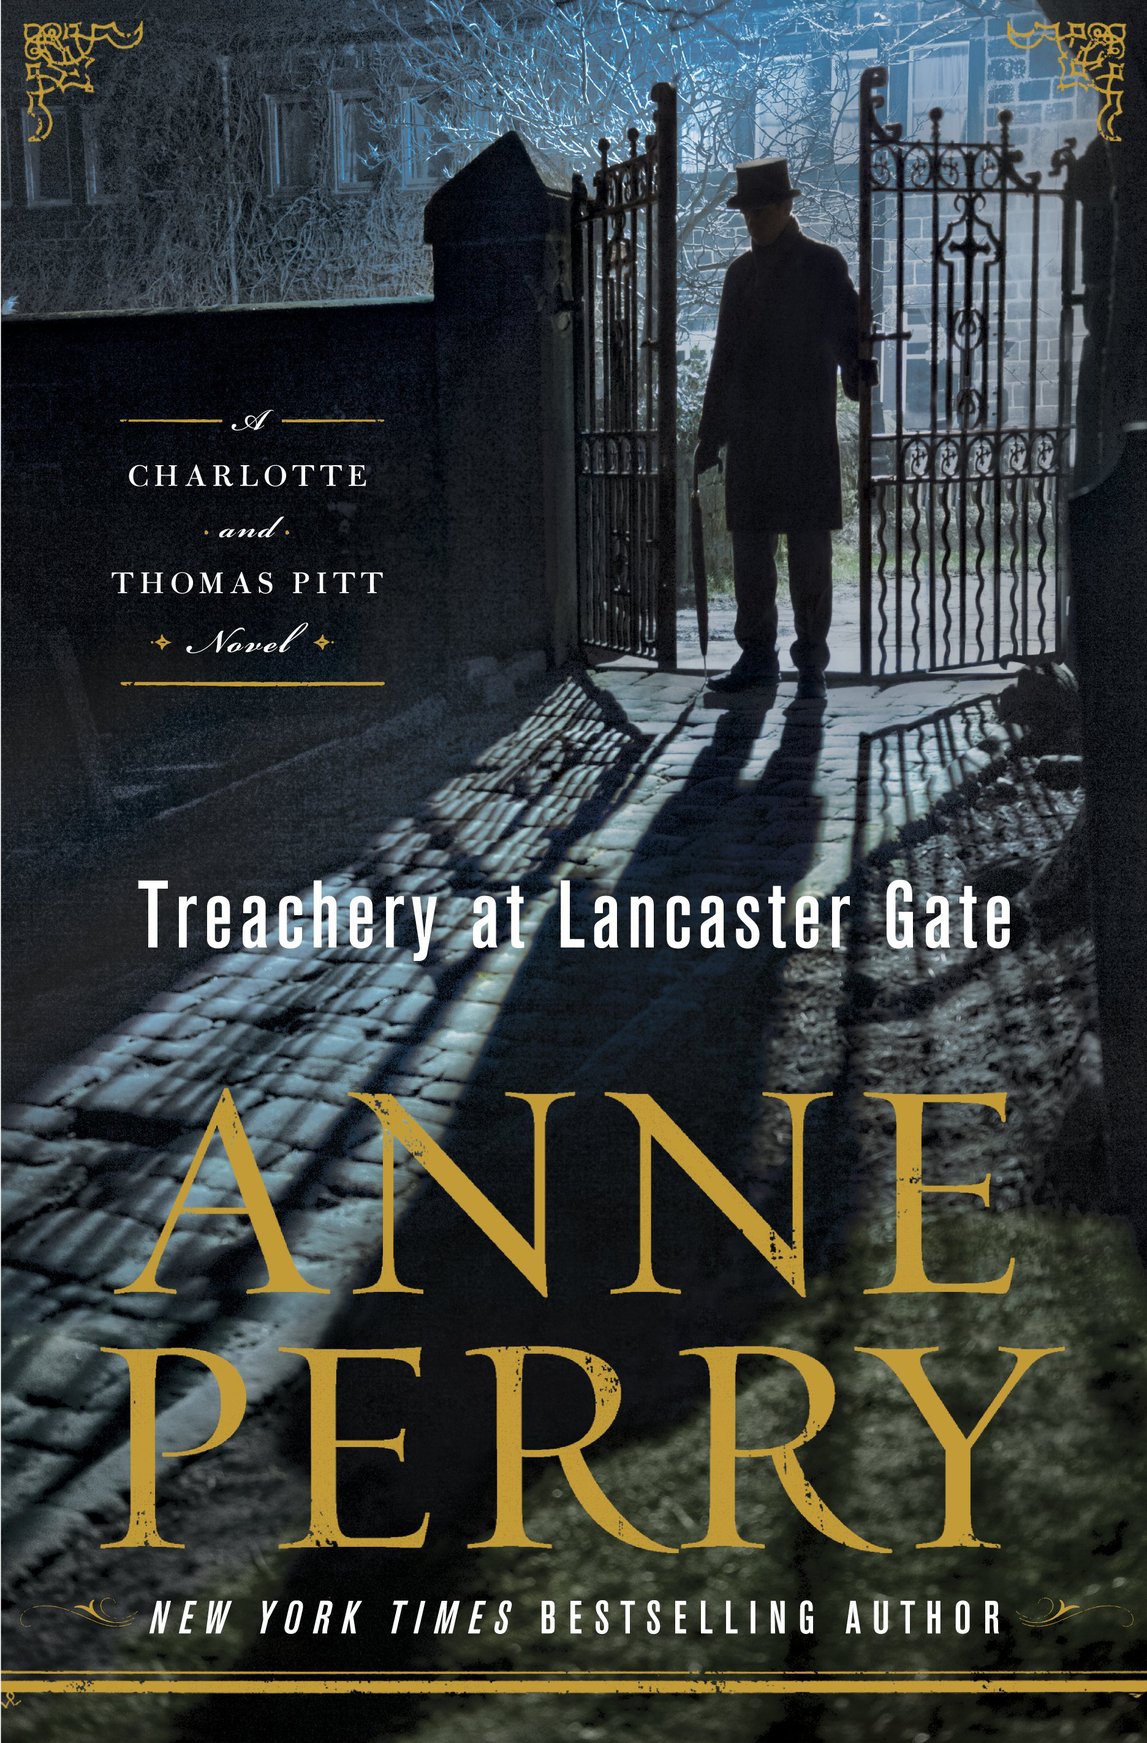 Treachery at Lancaster Gate (2016) by Anne Perry